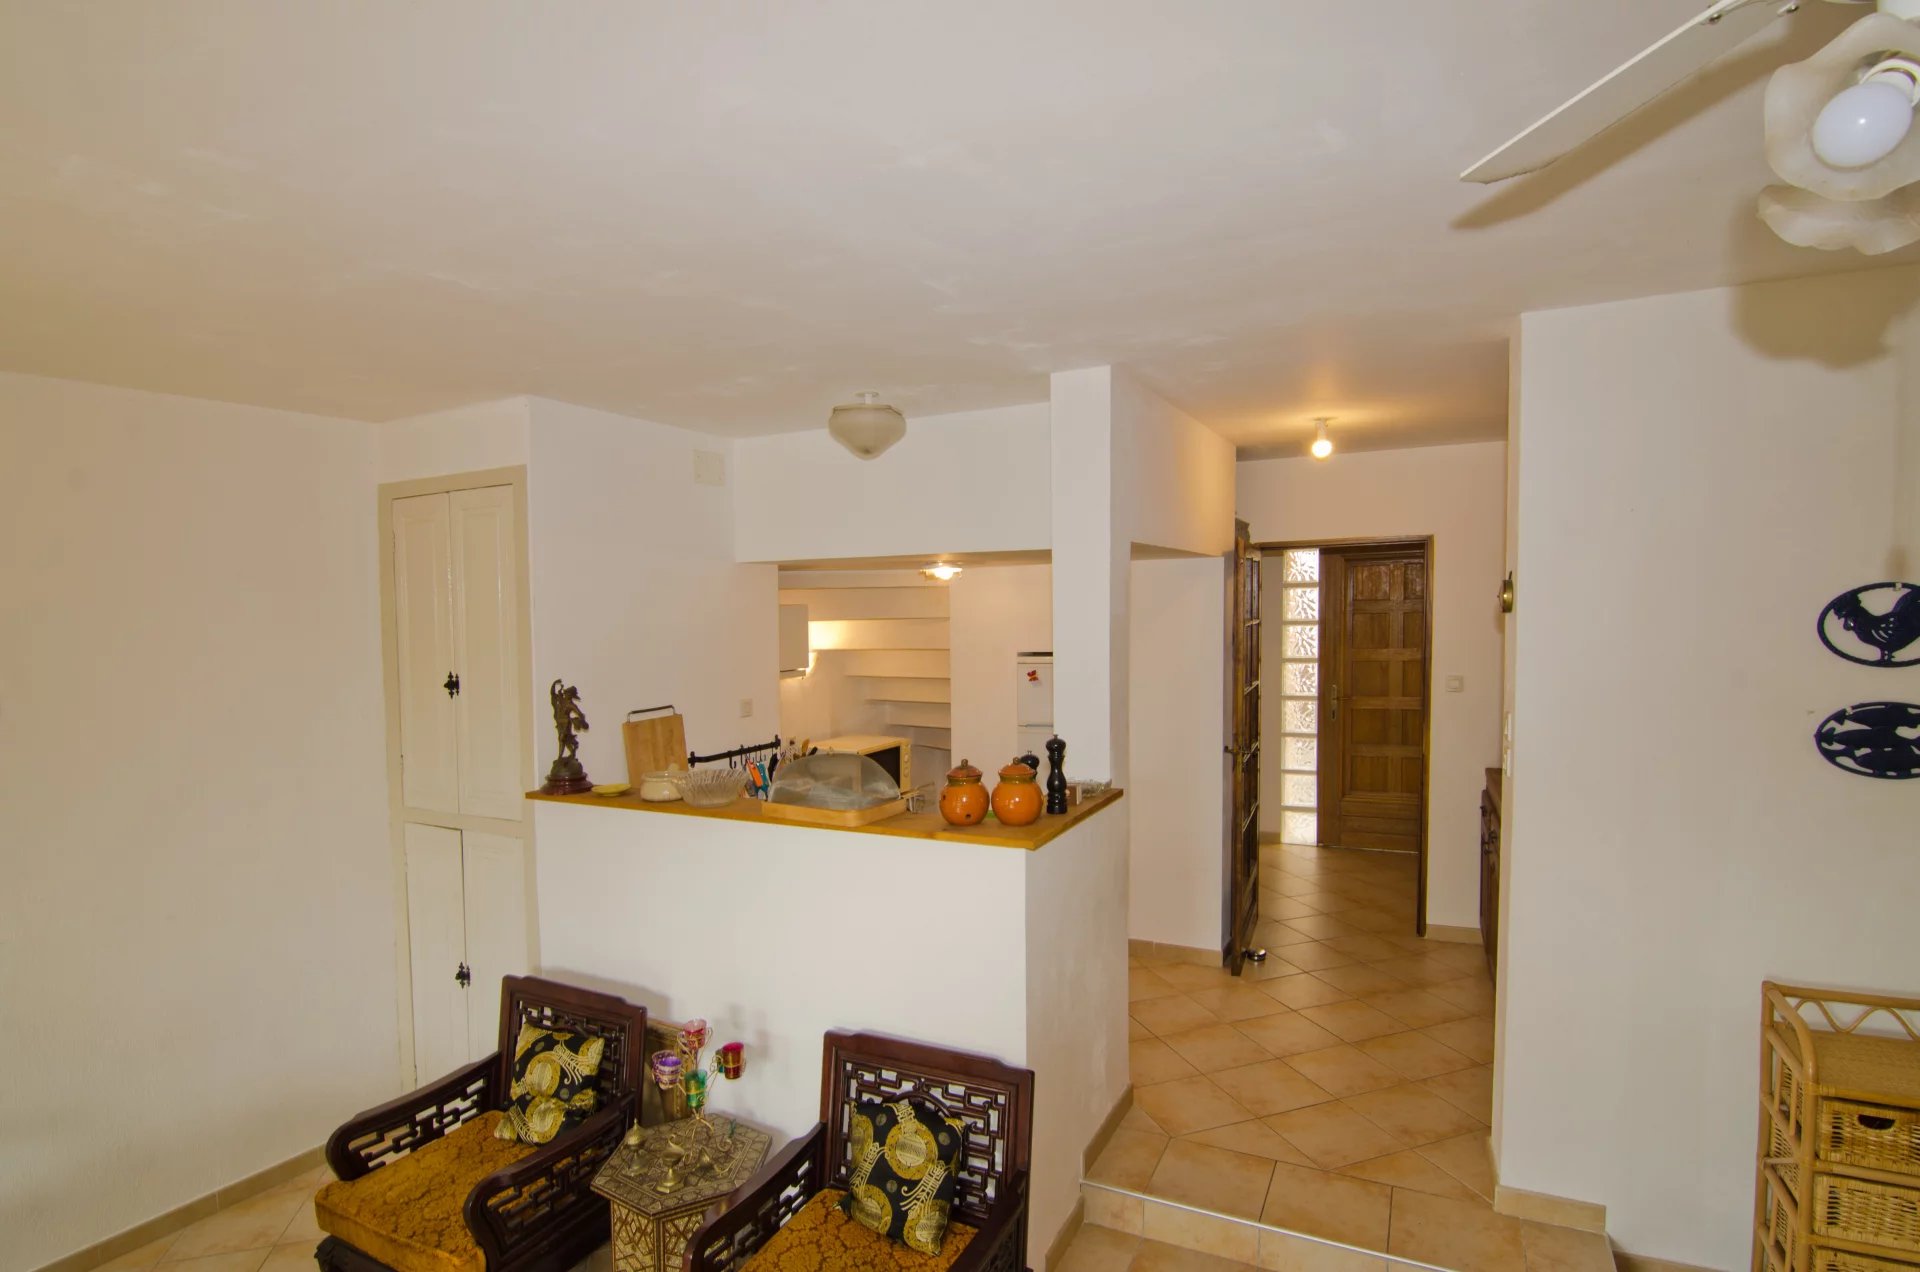 Townhouse in Tautavel, 140 m², 3 bedrooms, 2 bathrooms/toilets, terraces, garage, Vue panoramique.